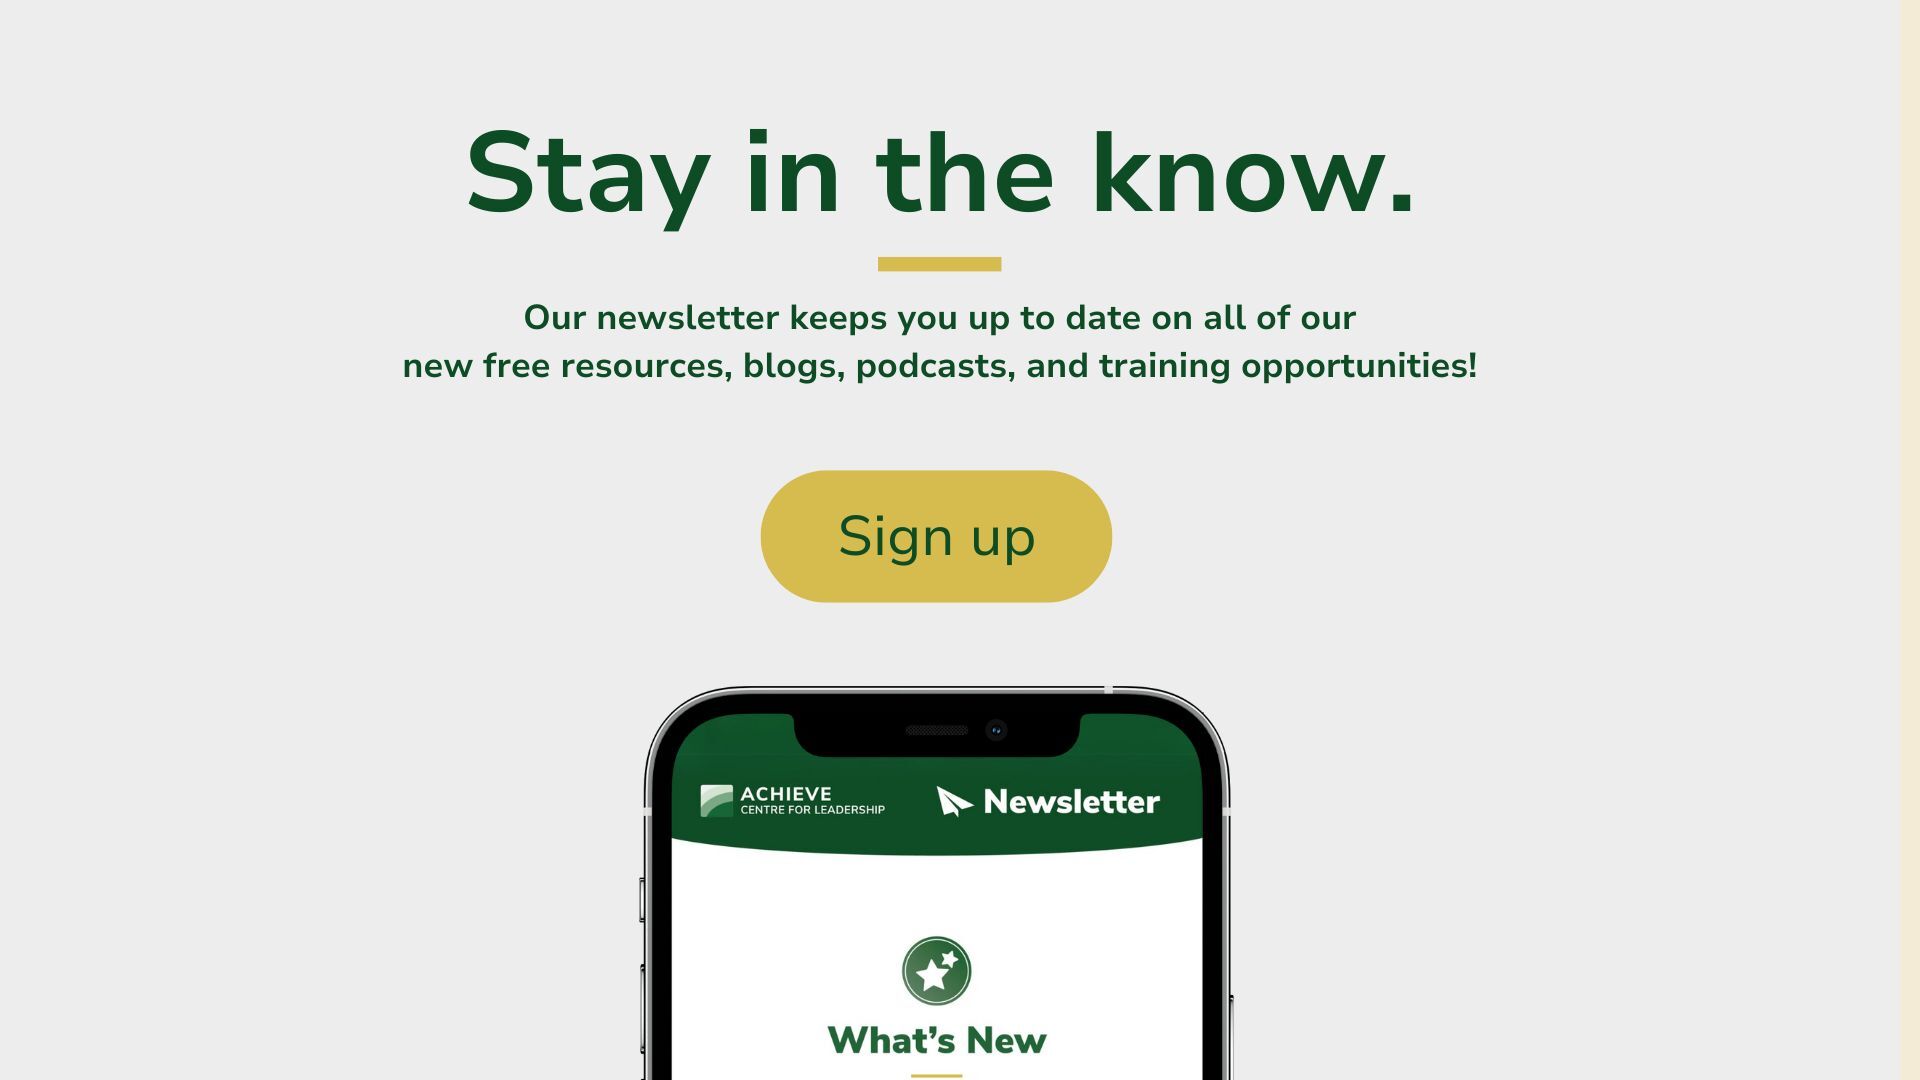 Image with phone with our ACHIEVE newsletter on it and header that says Stay in the know. Subtext says: Our newsletter keeps you up to date on all of our new free resources, blogs, podcasts, and training opportunities. Click to sign up